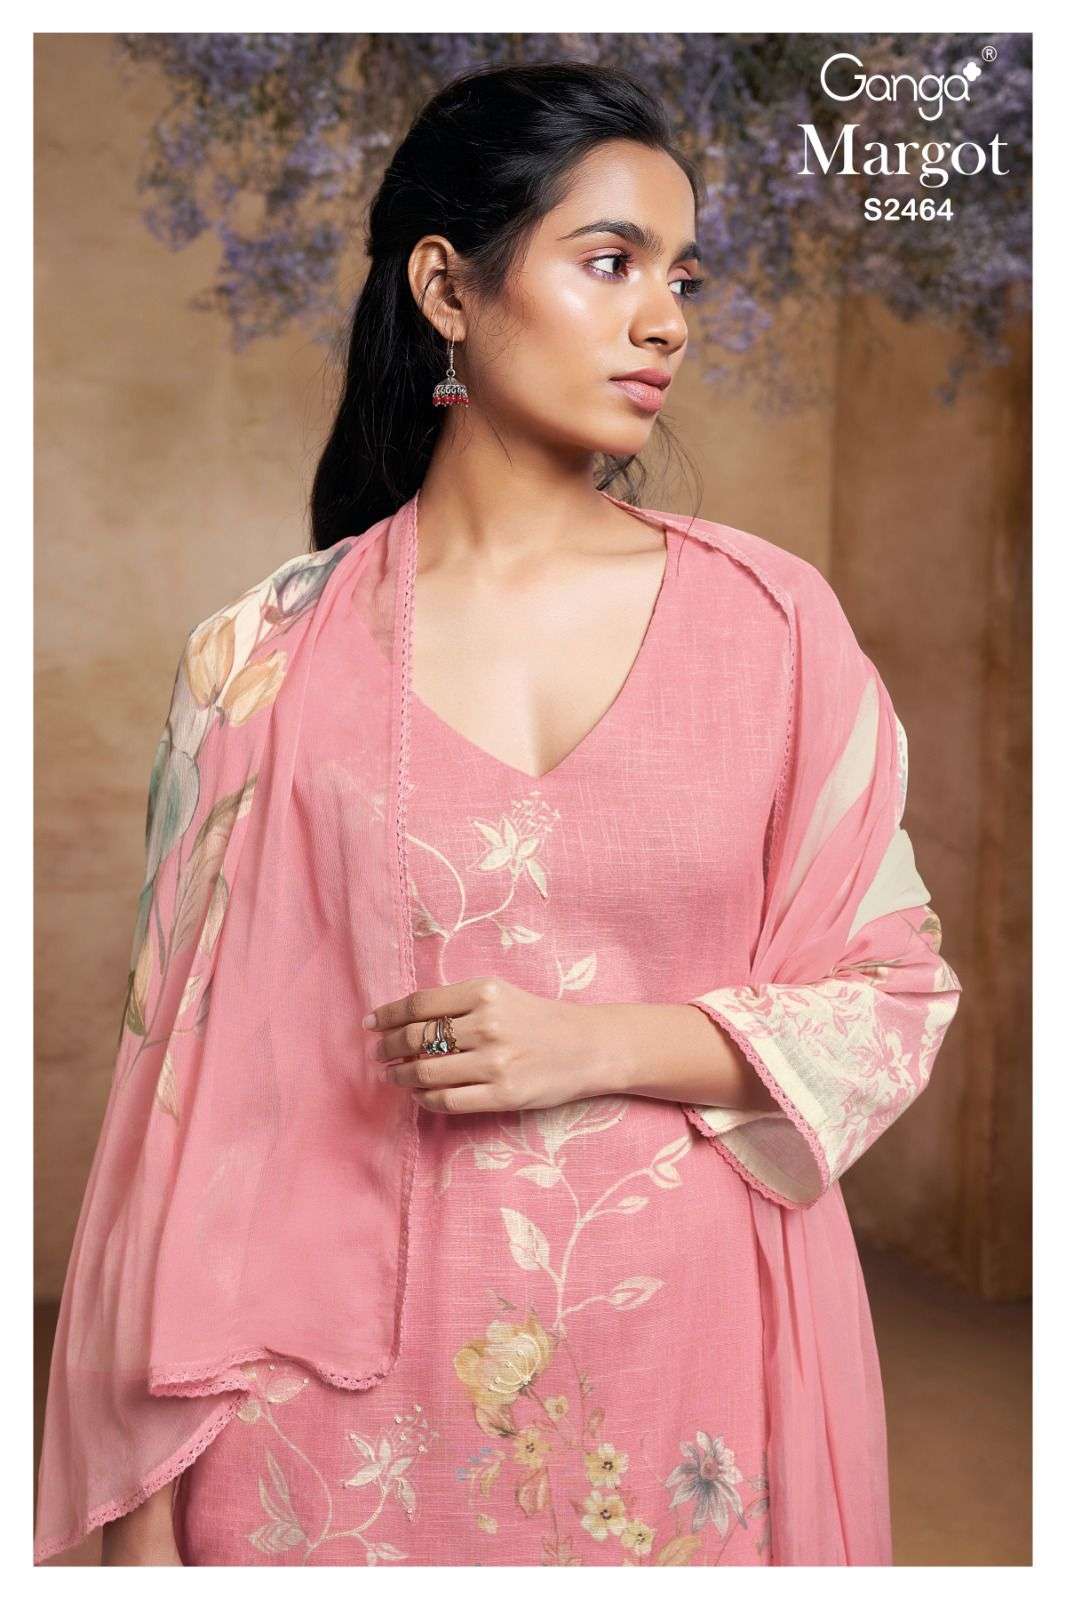 Ganga Margot 2464 Printed Linen Cotton Exclusive Suit New Collection